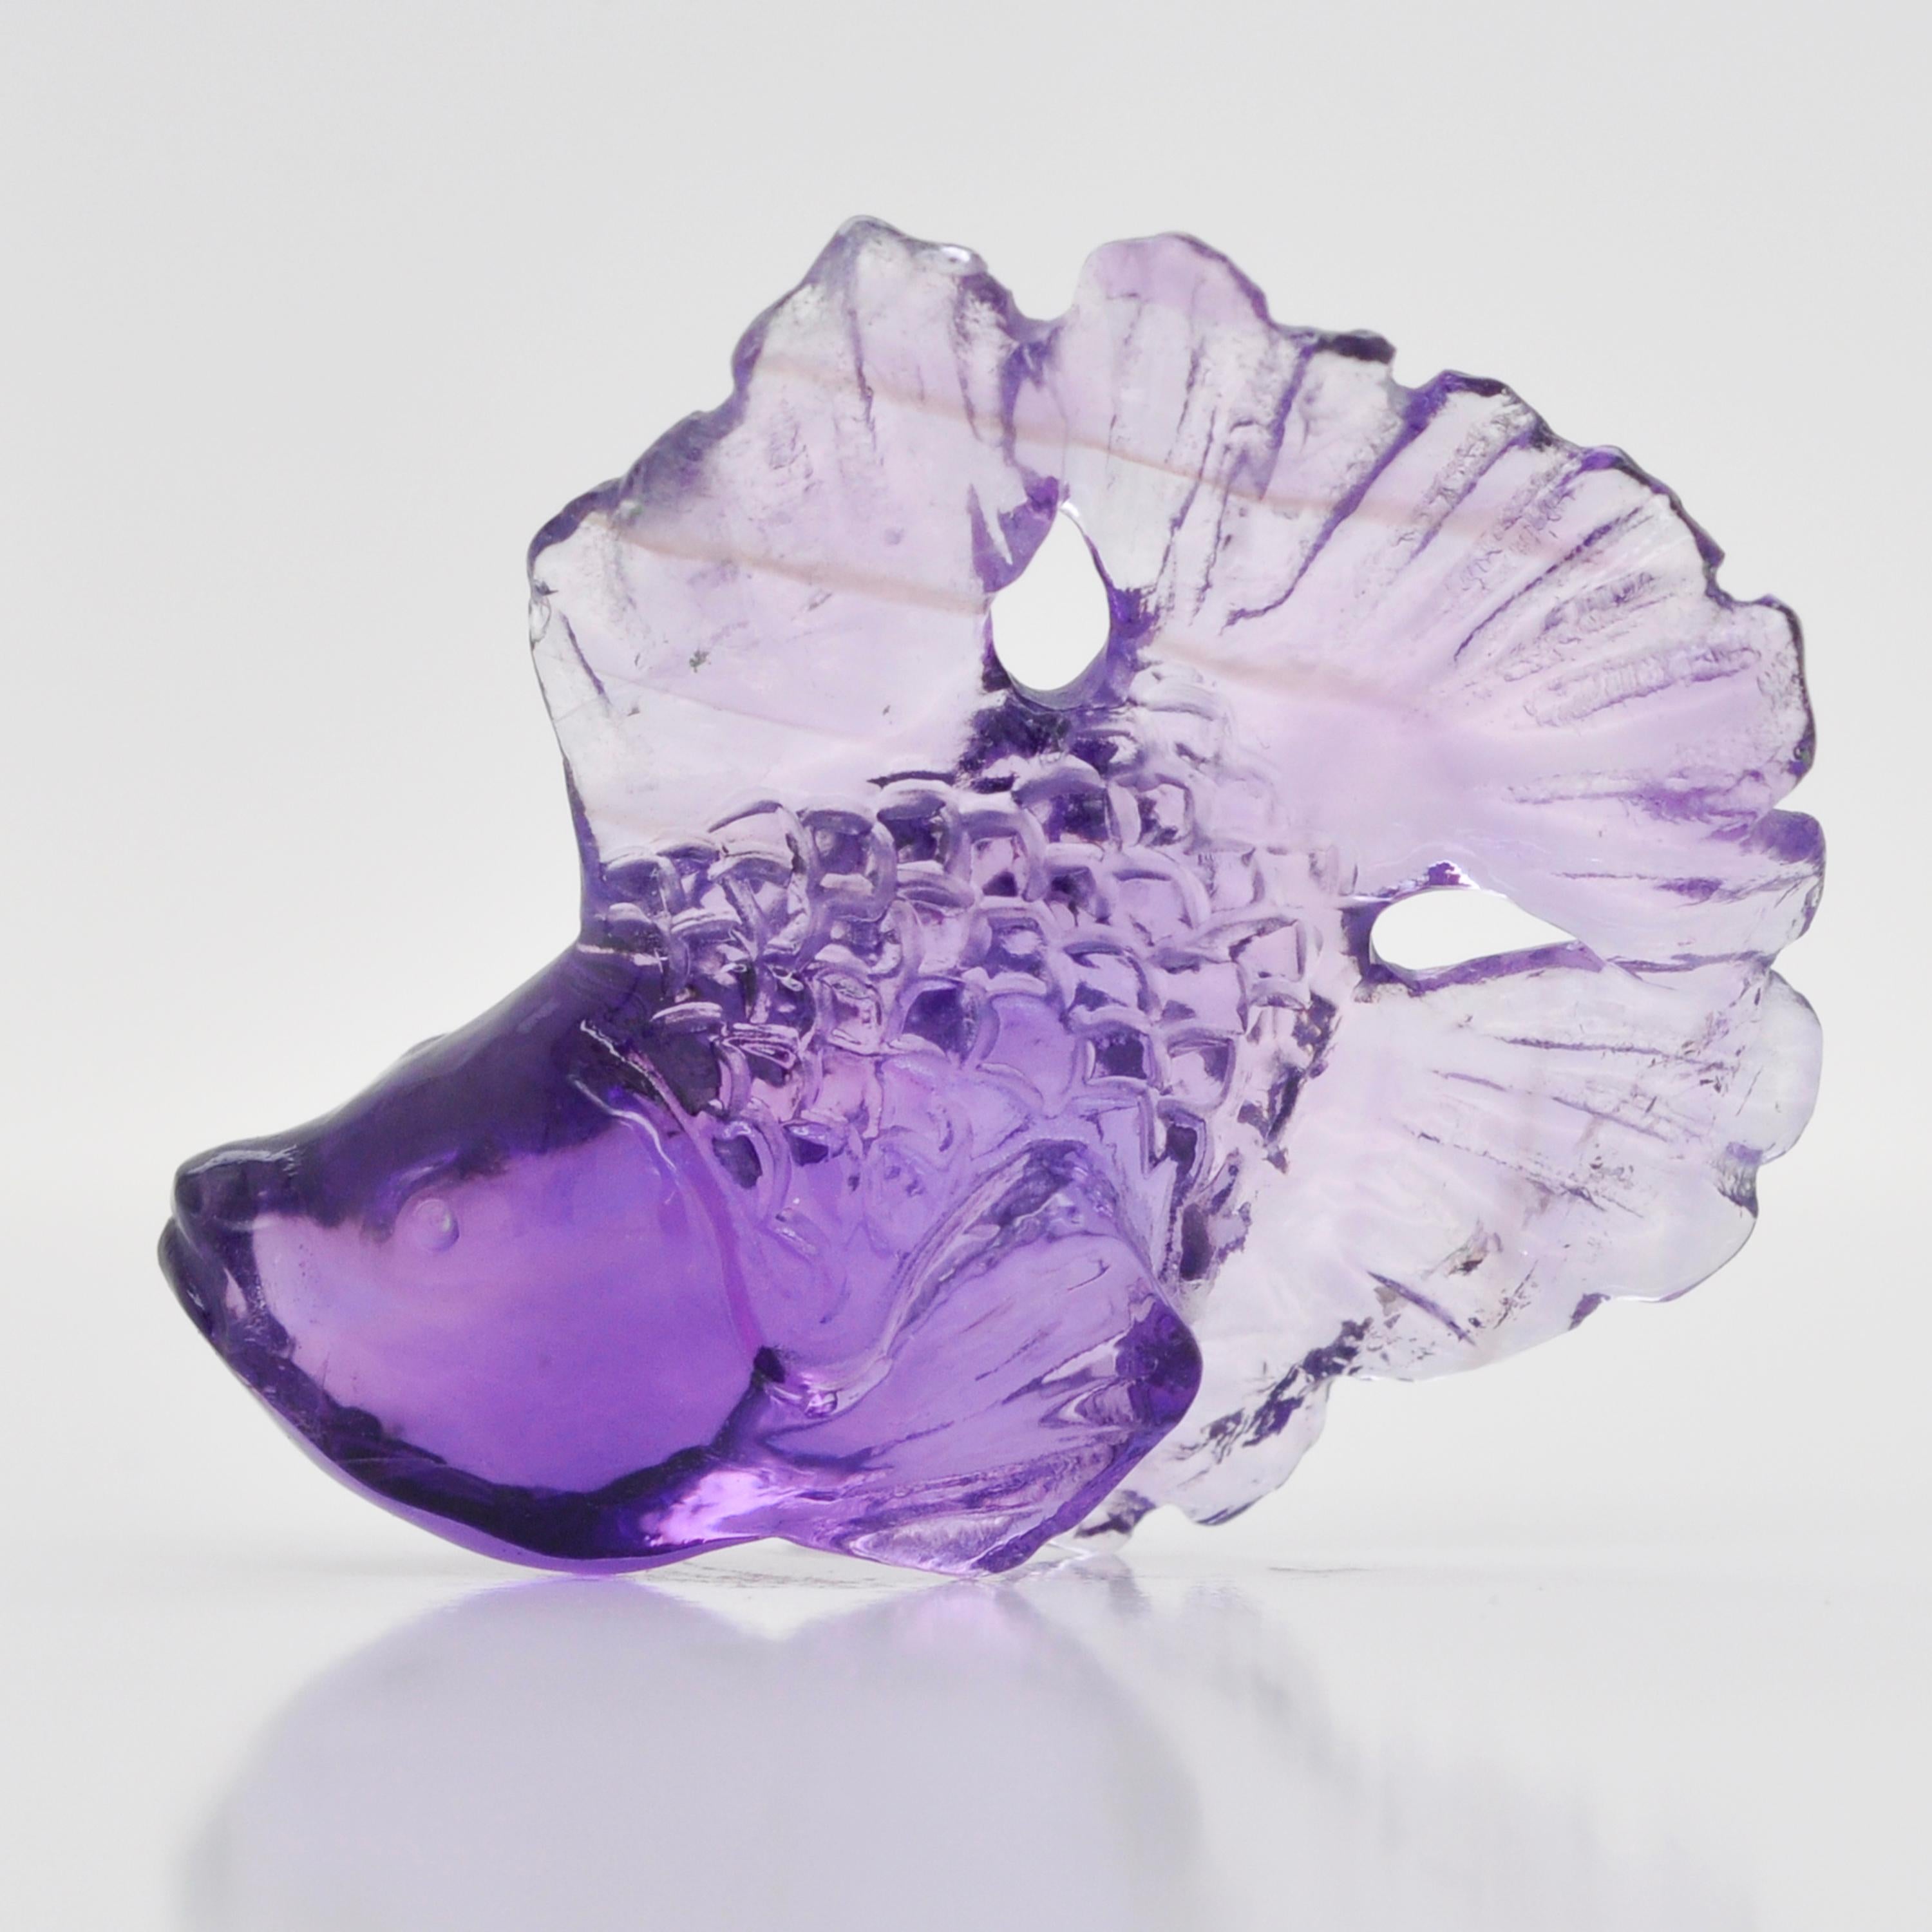 Our hand-carved 18.19 carats Natural African Amethyst Fish Loose Gemstone is a stunning work of art crafted by our expert lapidary artist in Jaipur. With exceptional skill and attention to detail, the lapidary artist has transformed a raw African